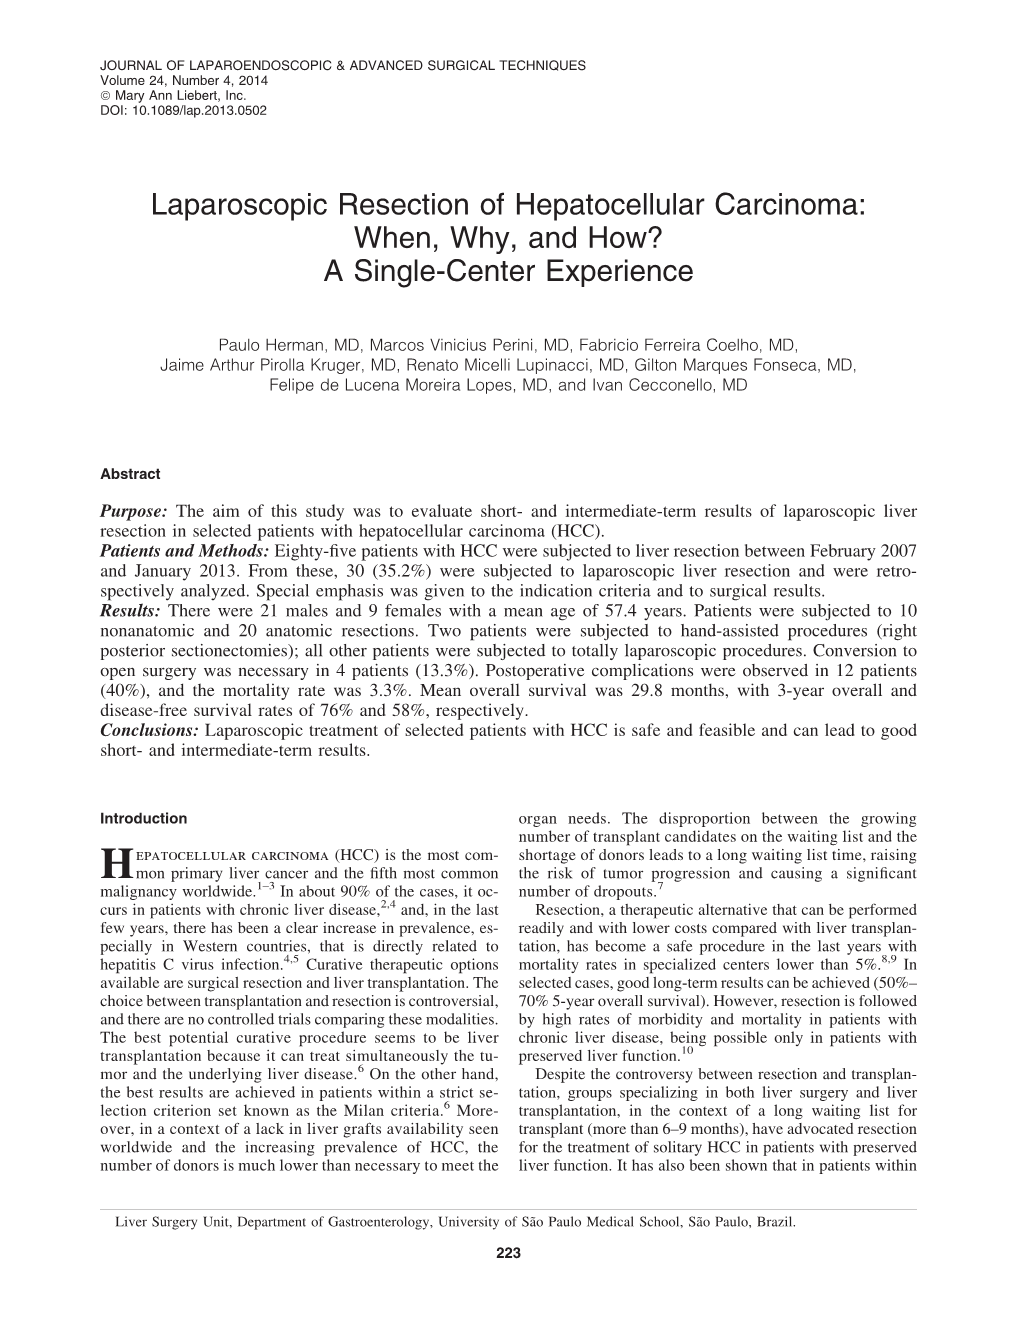 Laparoscopic Resection of Hepatocellular Carcinoma: When, Why, and How? a Single-Center Experience